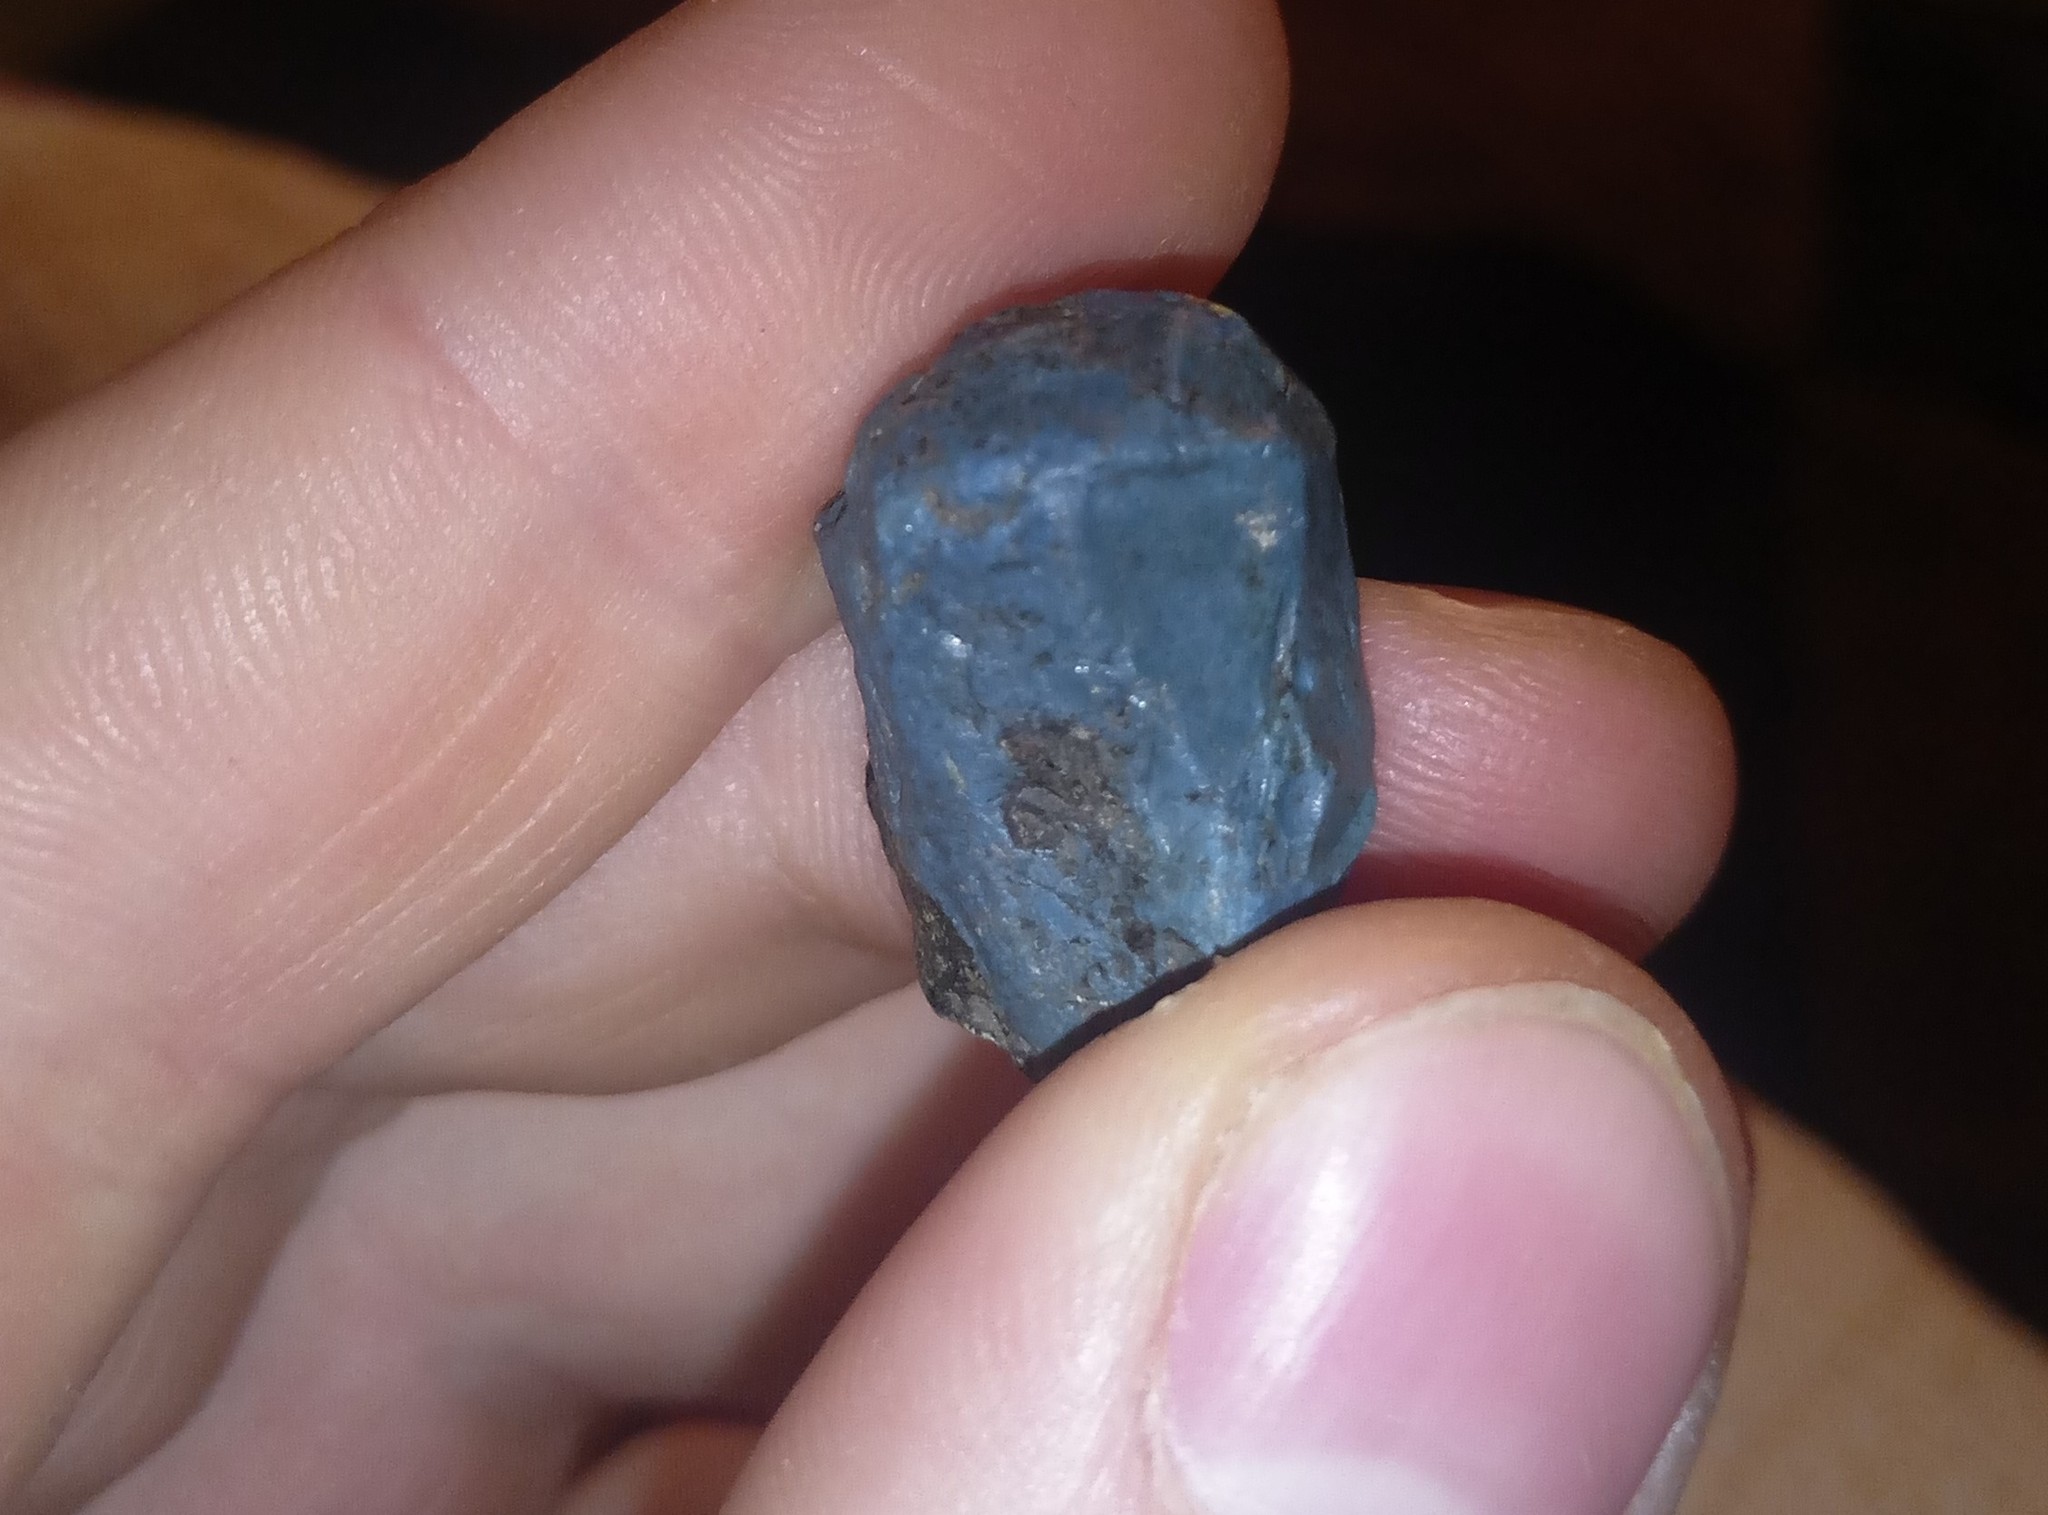 A stone from childhood. - My, What kind of stone?, blue stone, Help in replying), Help